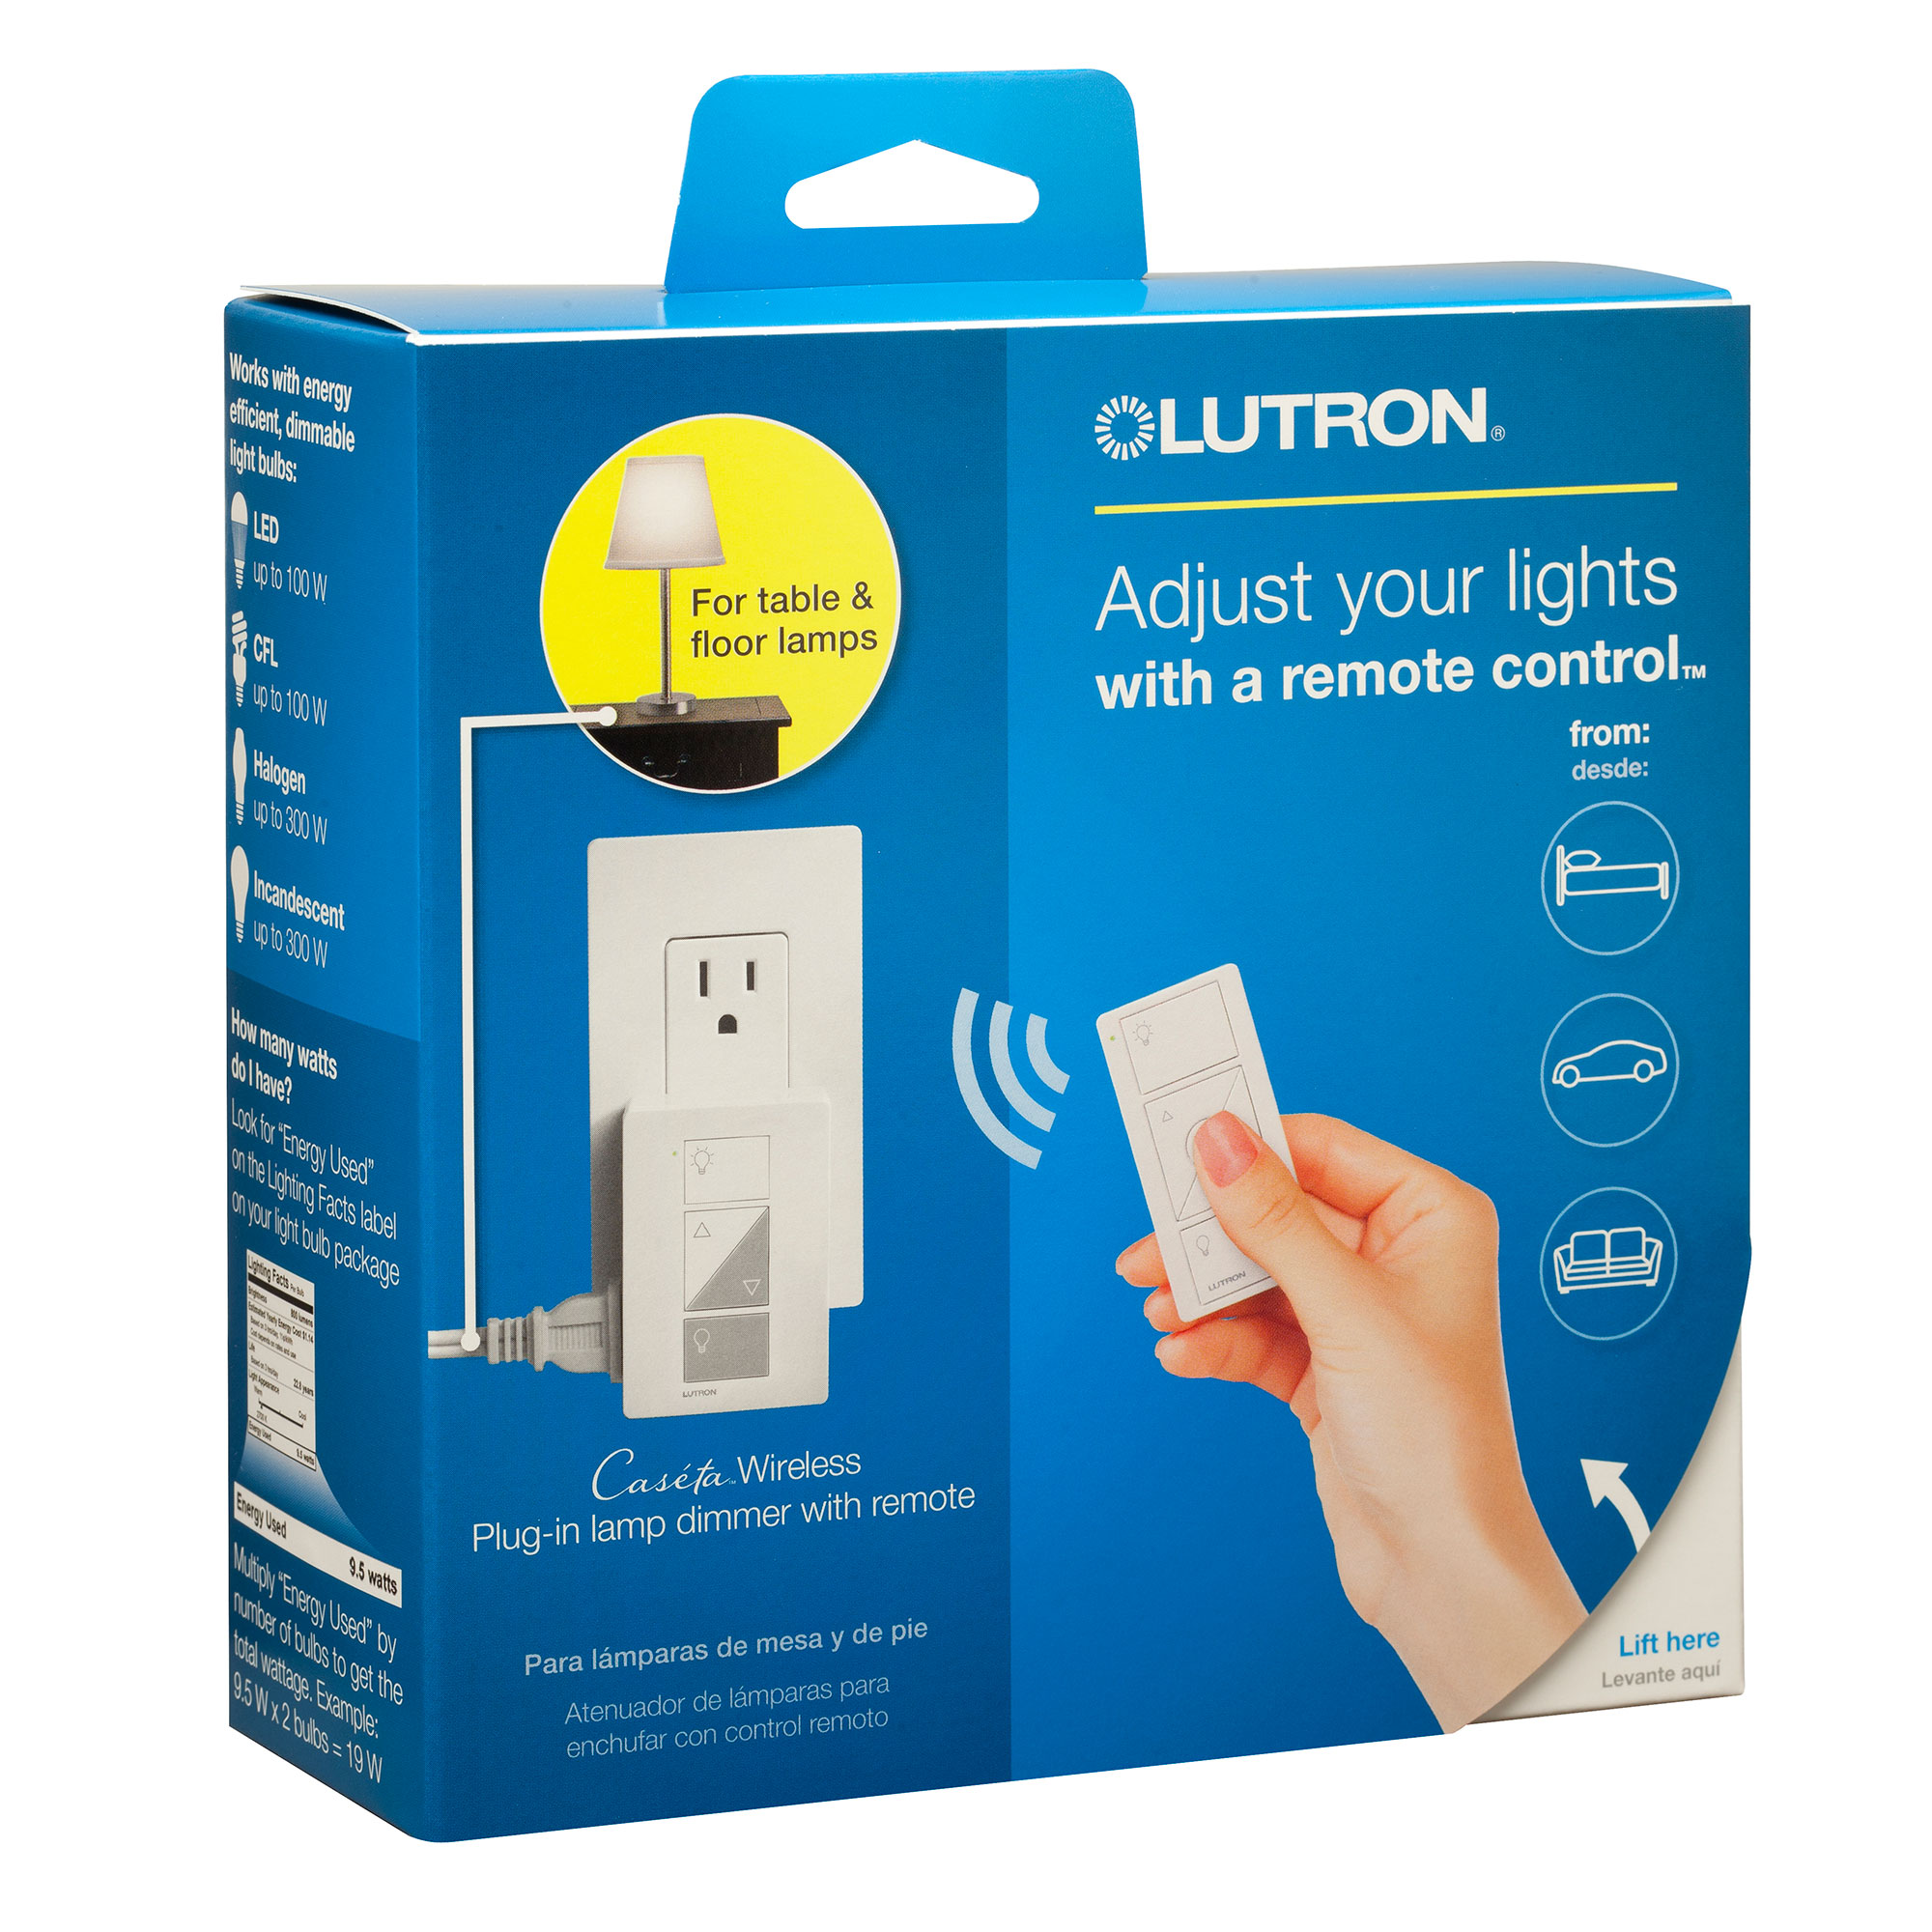 tand stof Profit Caseta Plug-in Lamp Dimmer with Pico Remote Control Kit by Lutron |  P-PKG1P-WH | LUT206187